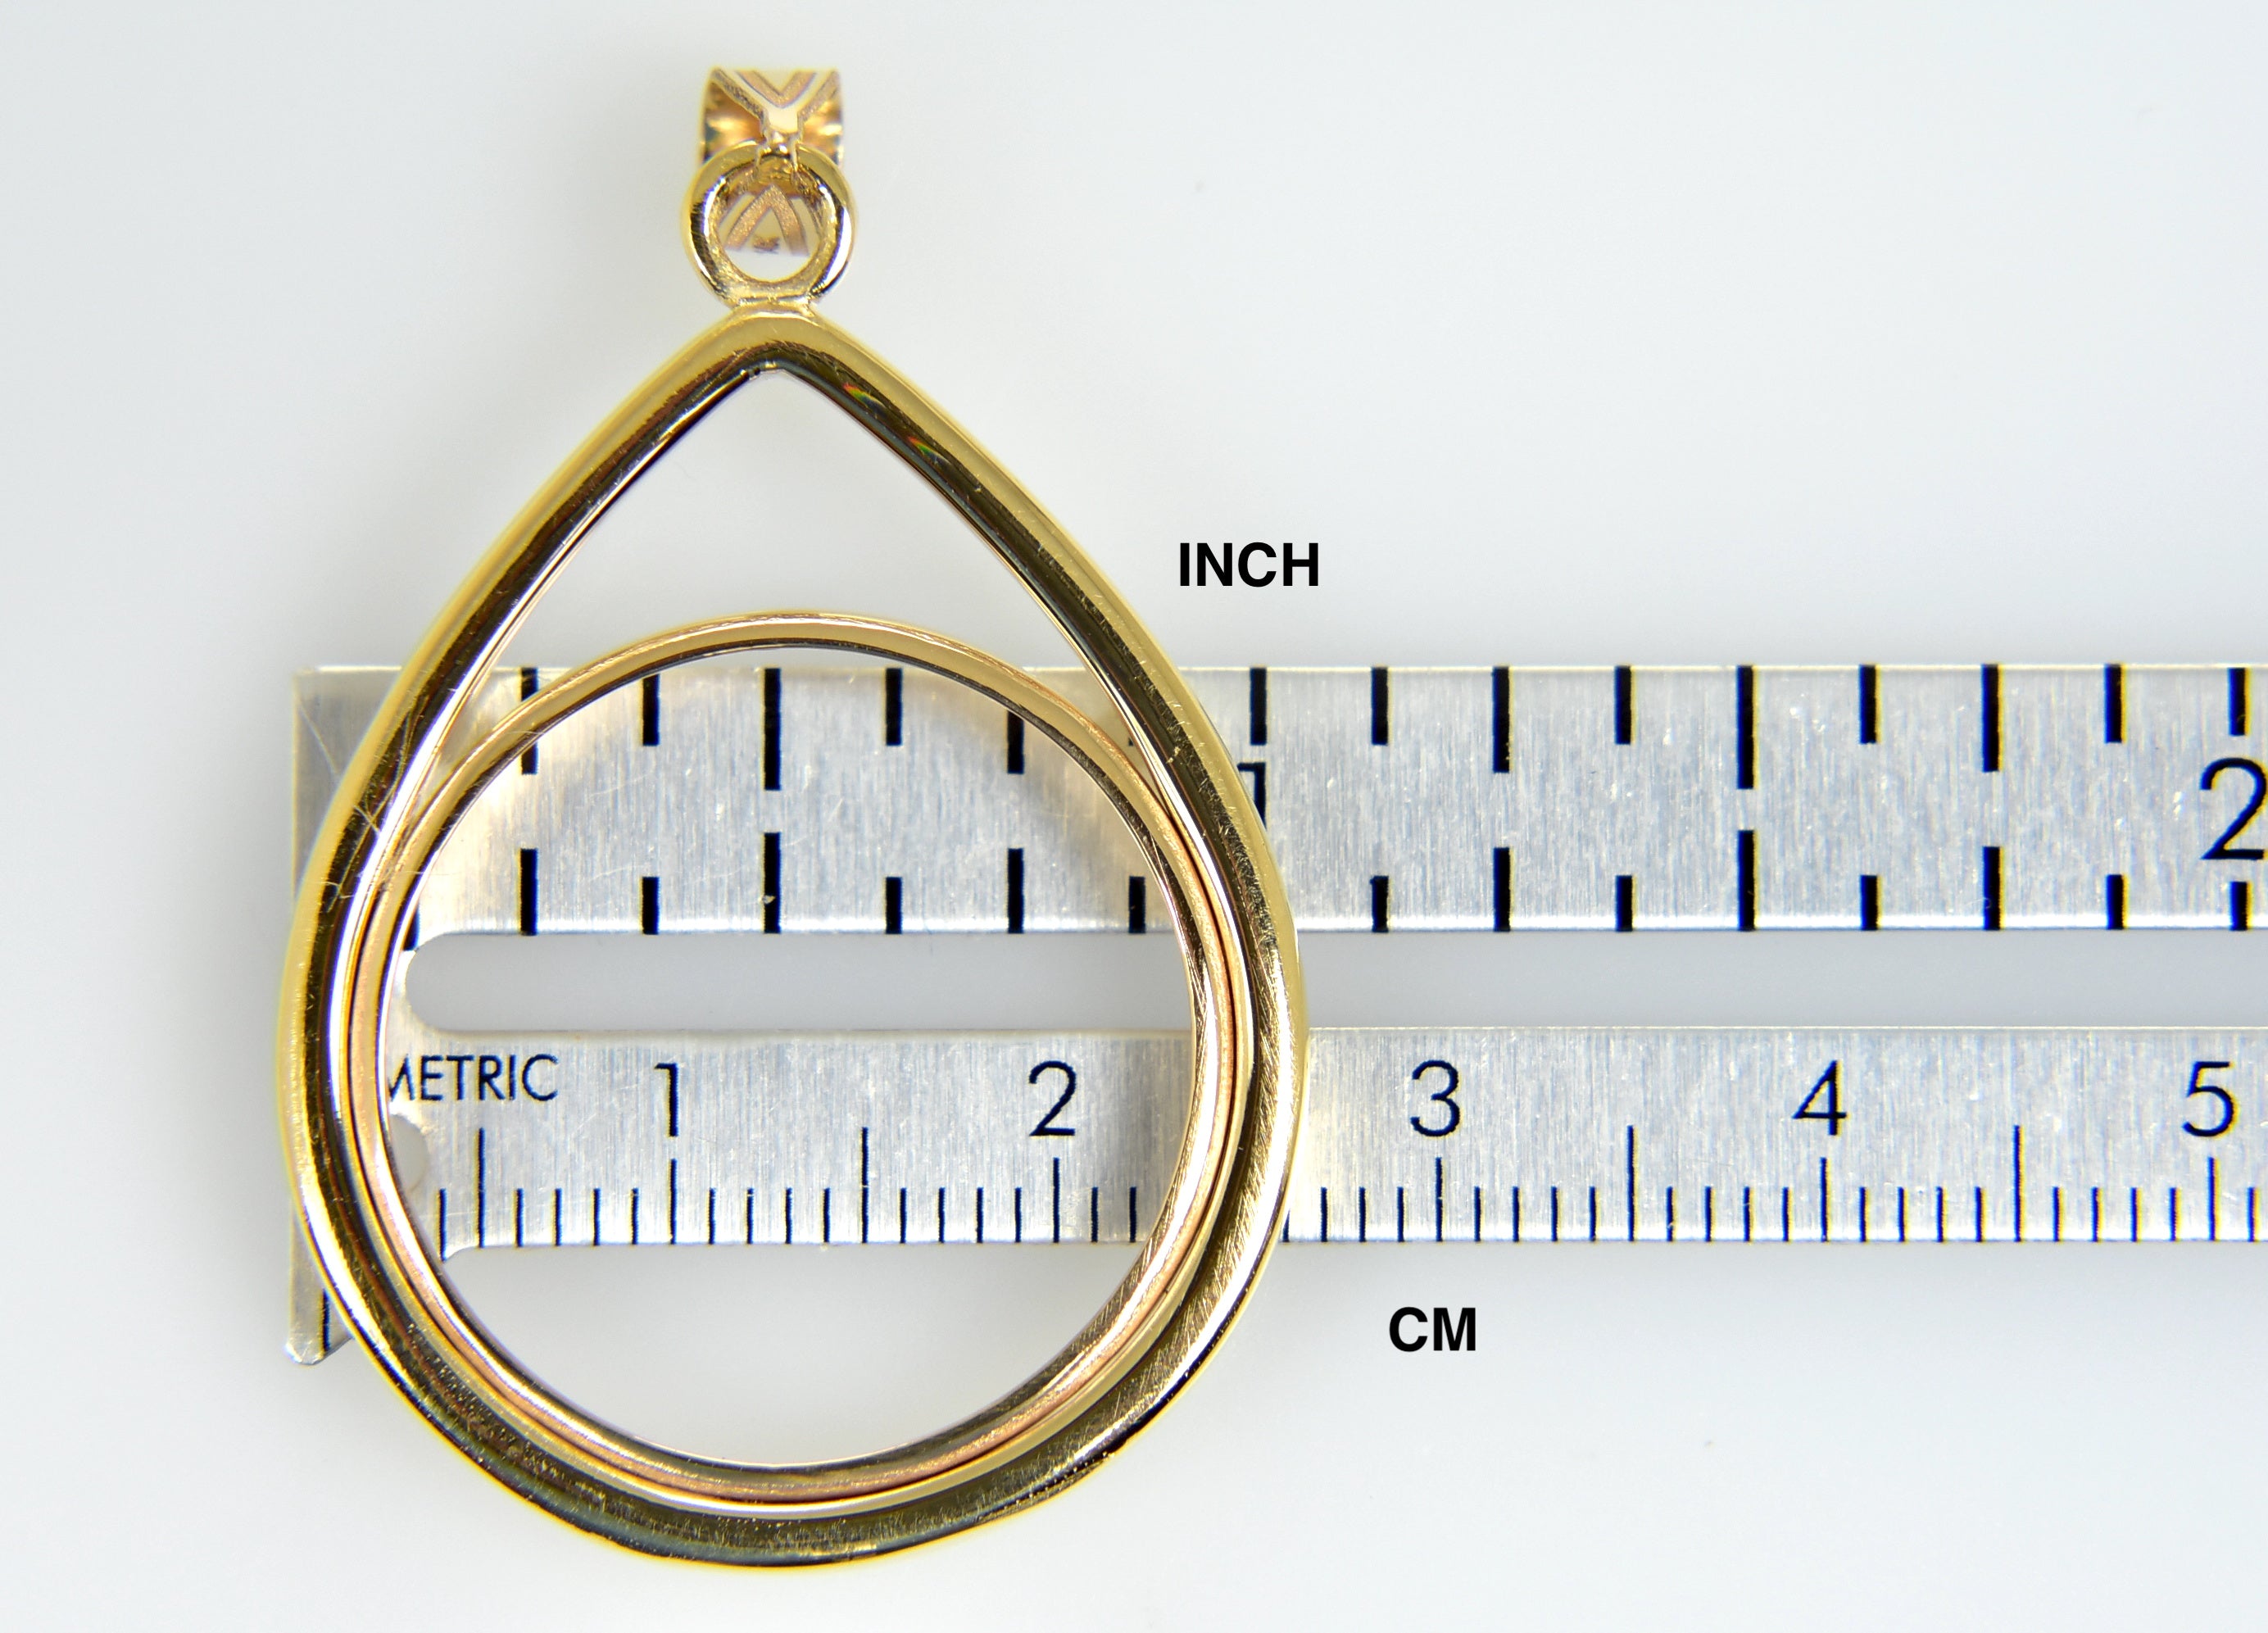 14K Yellow Gold 1/4 oz One Fourth Ounce American Eagle Teardrop Coin Holder Prong Bezel Pendant Charm for 22mm x 1.8mm